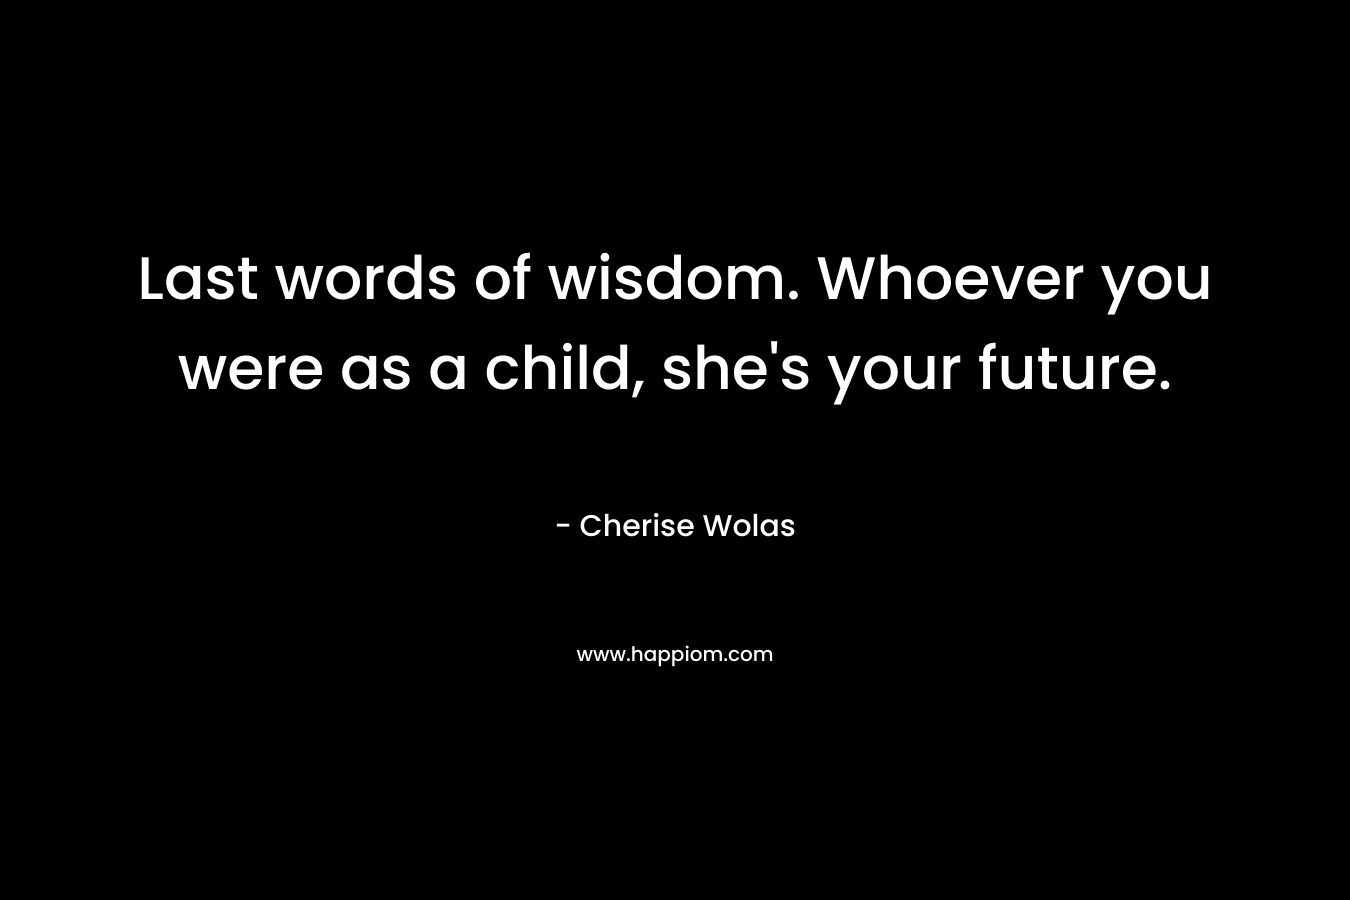 Last words of wisdom. Whoever you were as a child, she's your future.